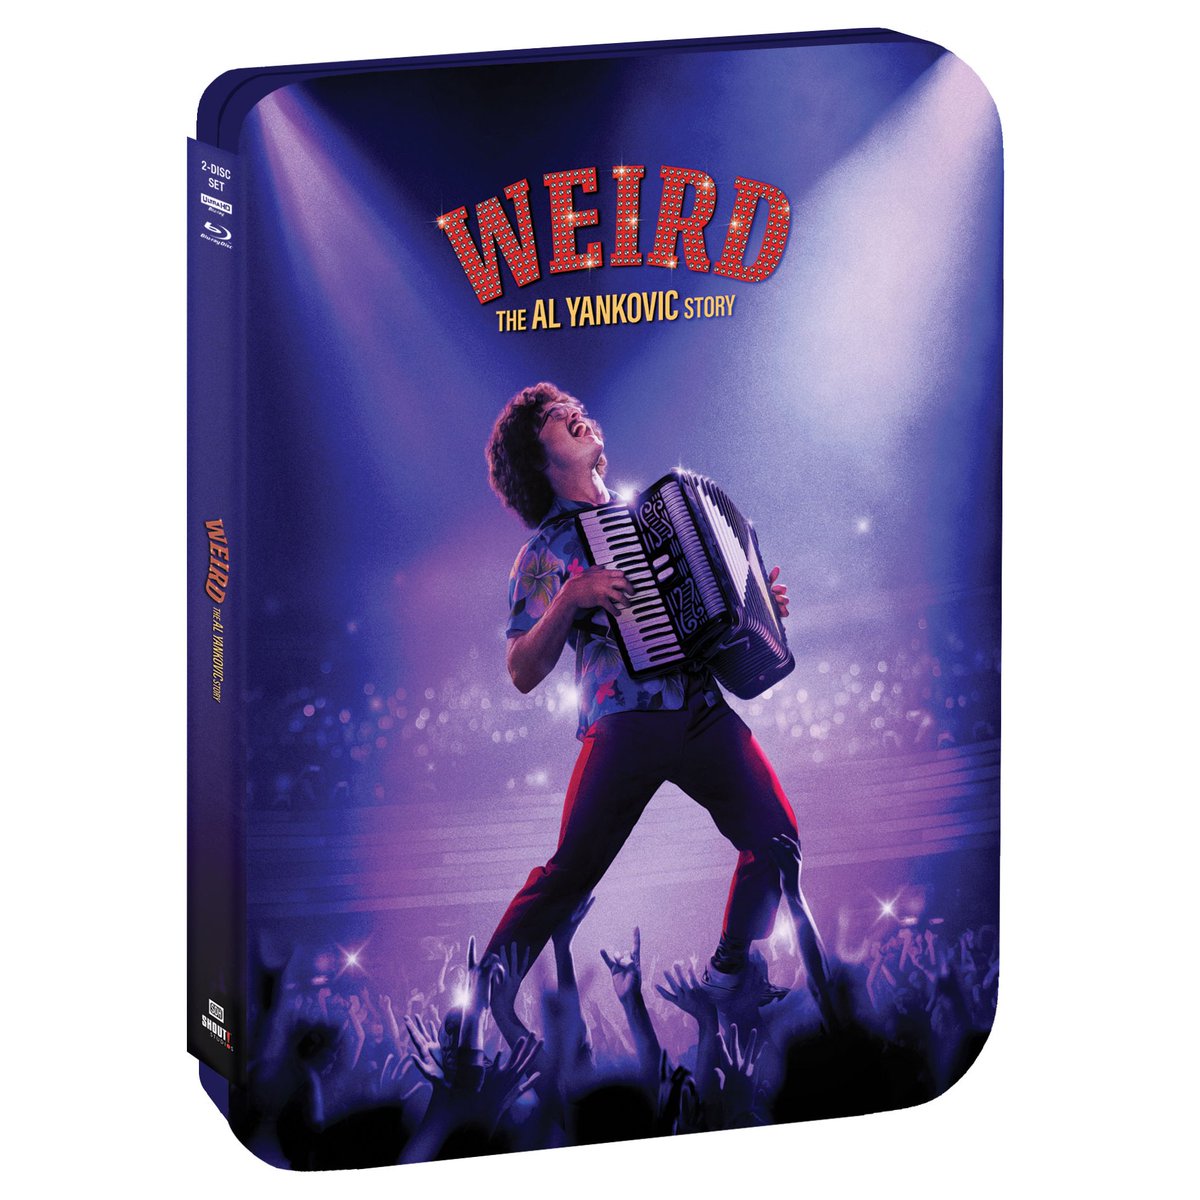 The world belongs to the weird. WEIRD: THE AL YANKOVIC STORY Limited Edition SteelBook comes to our store July 2. Pre-order: shoutfactory.com/products/weird…